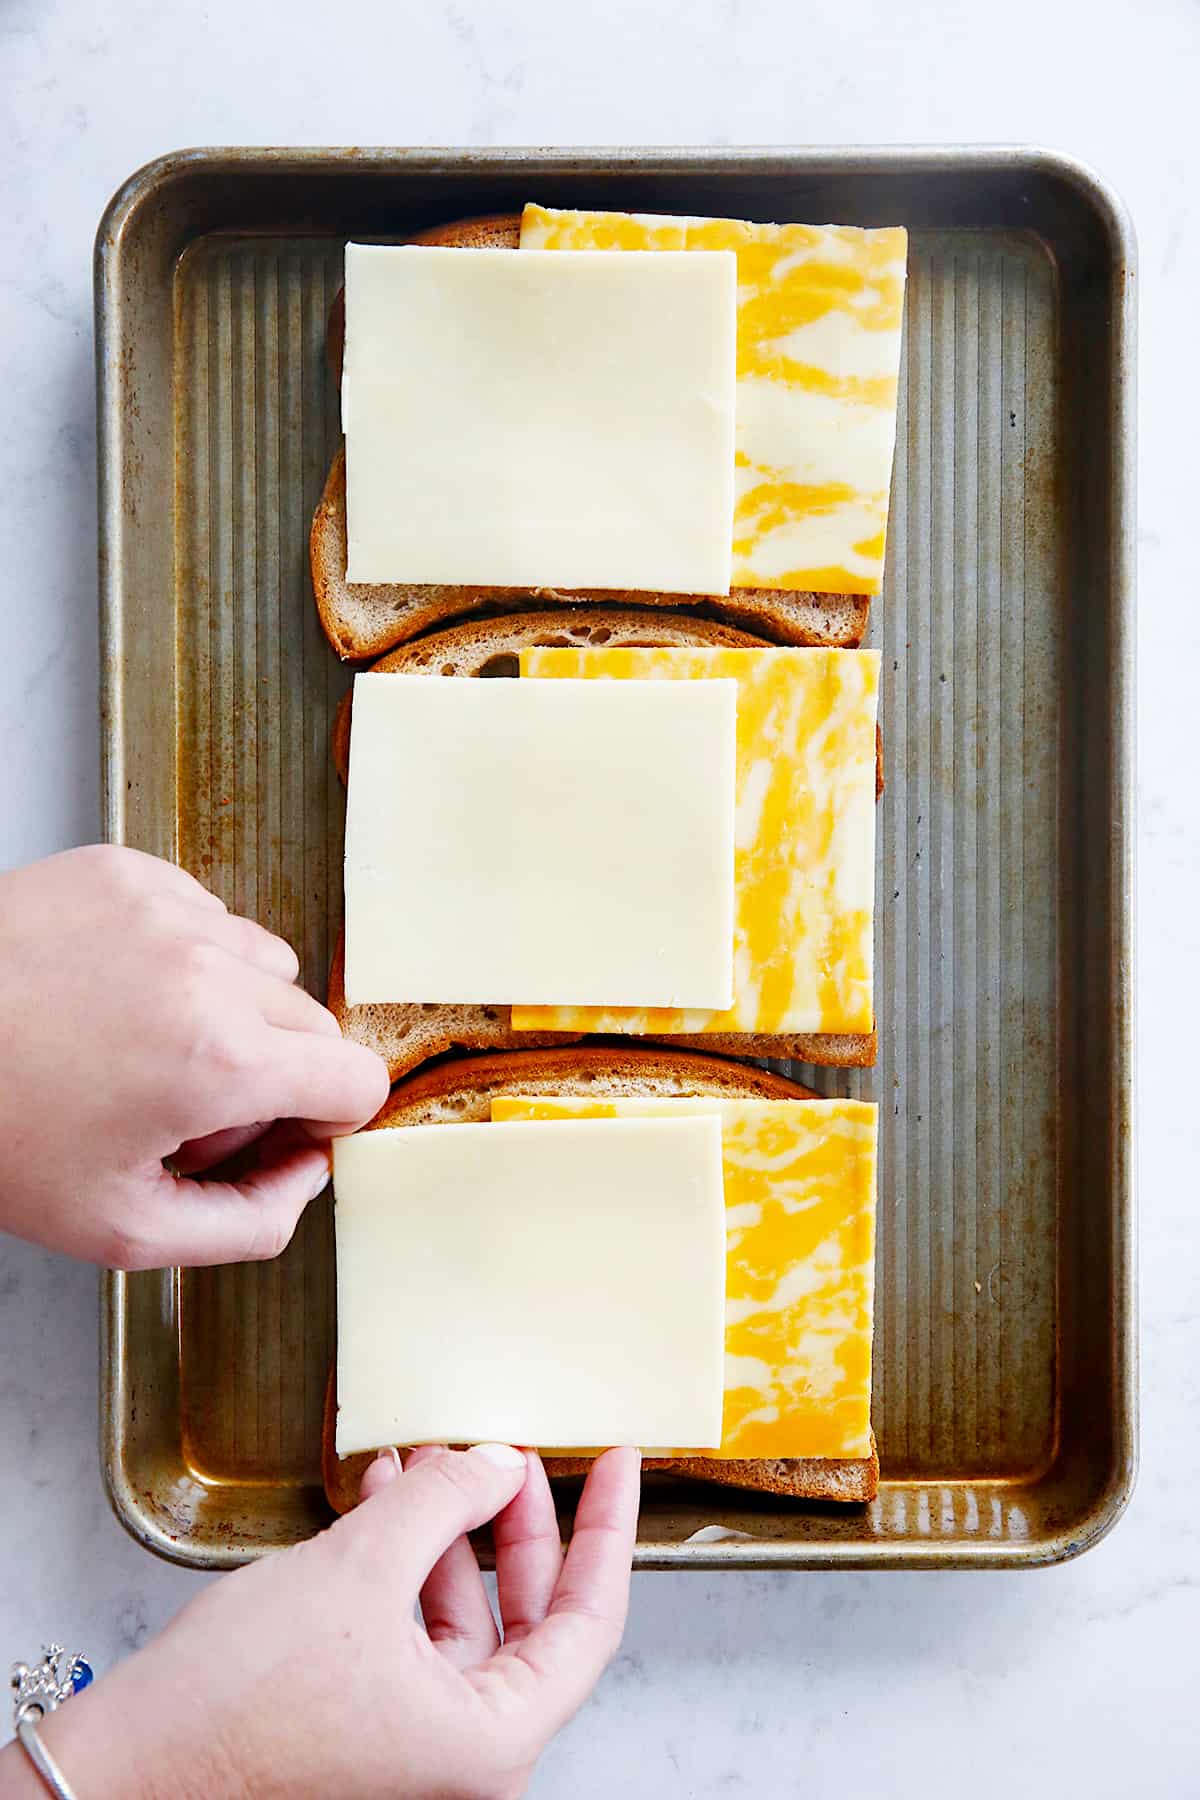 cheese being layered onto a sandwich.